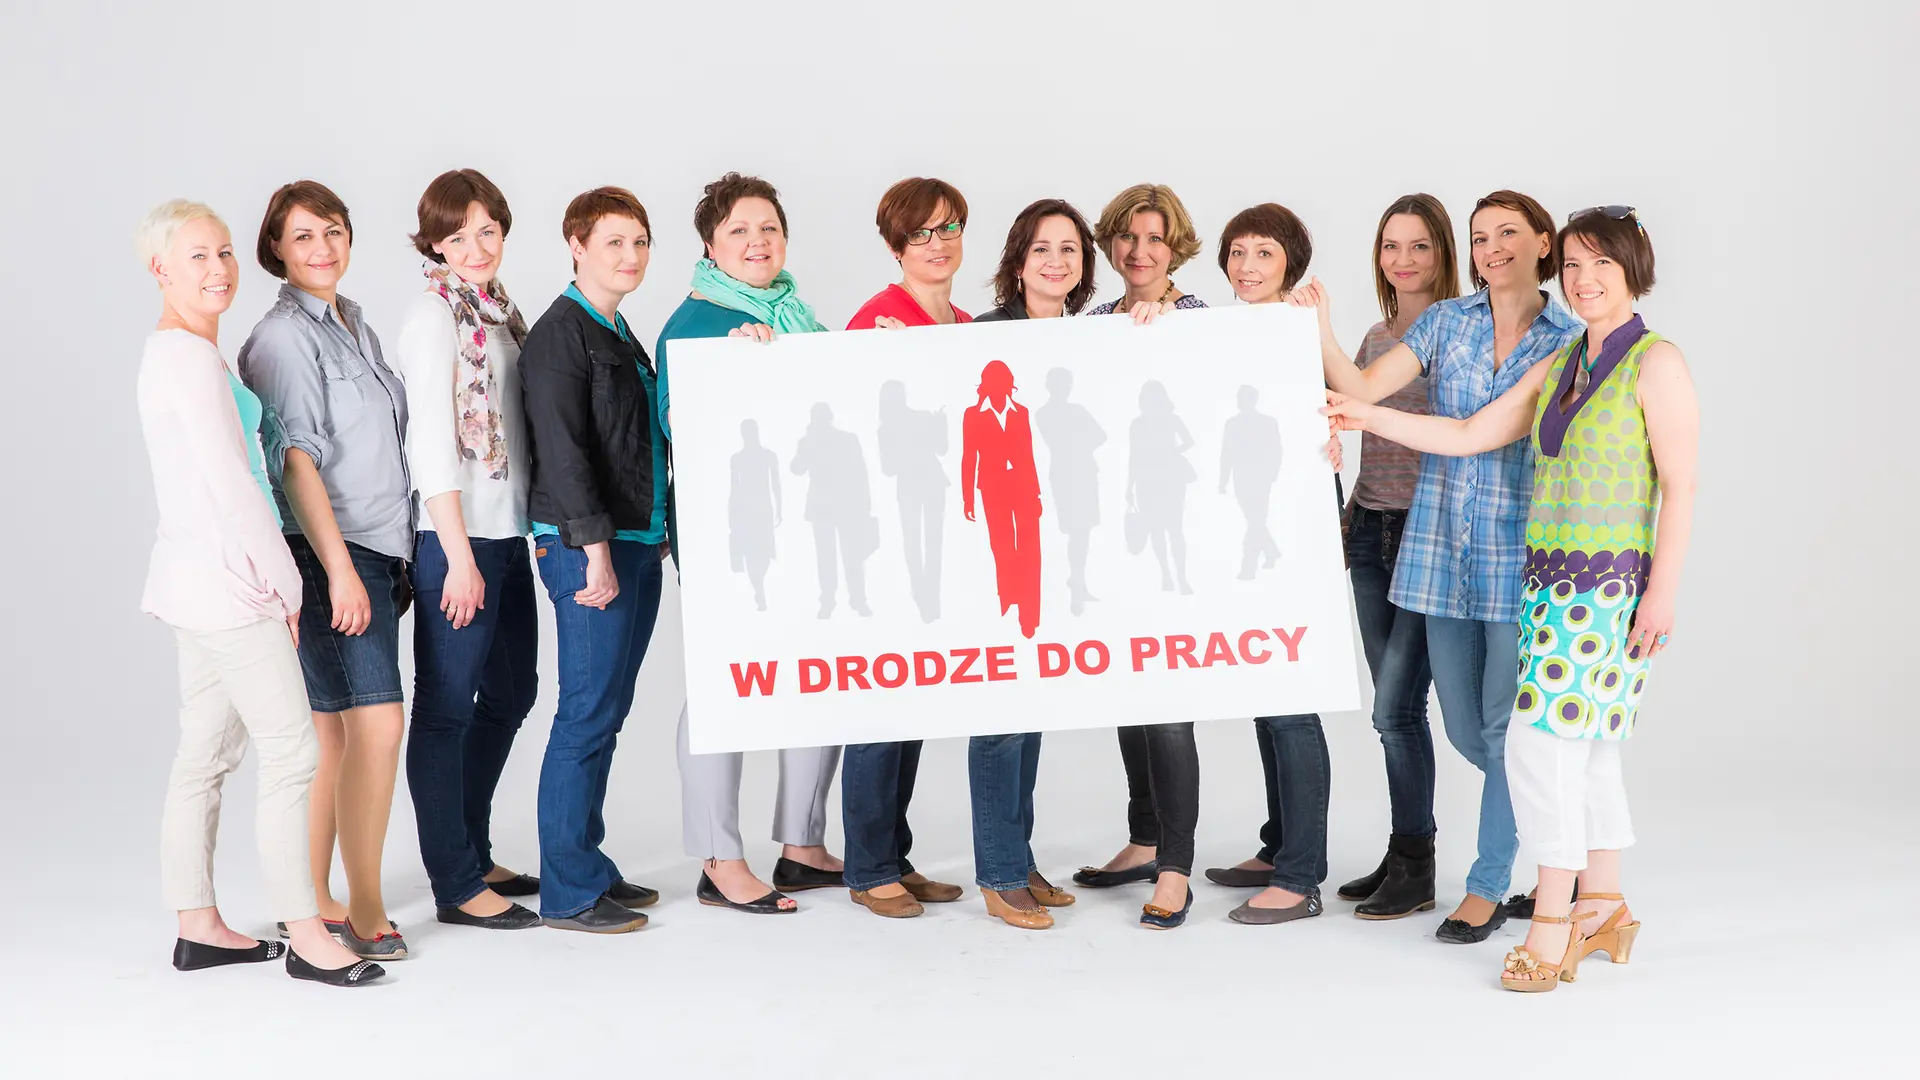 Women standing together with the “W drodze do pracy” sign